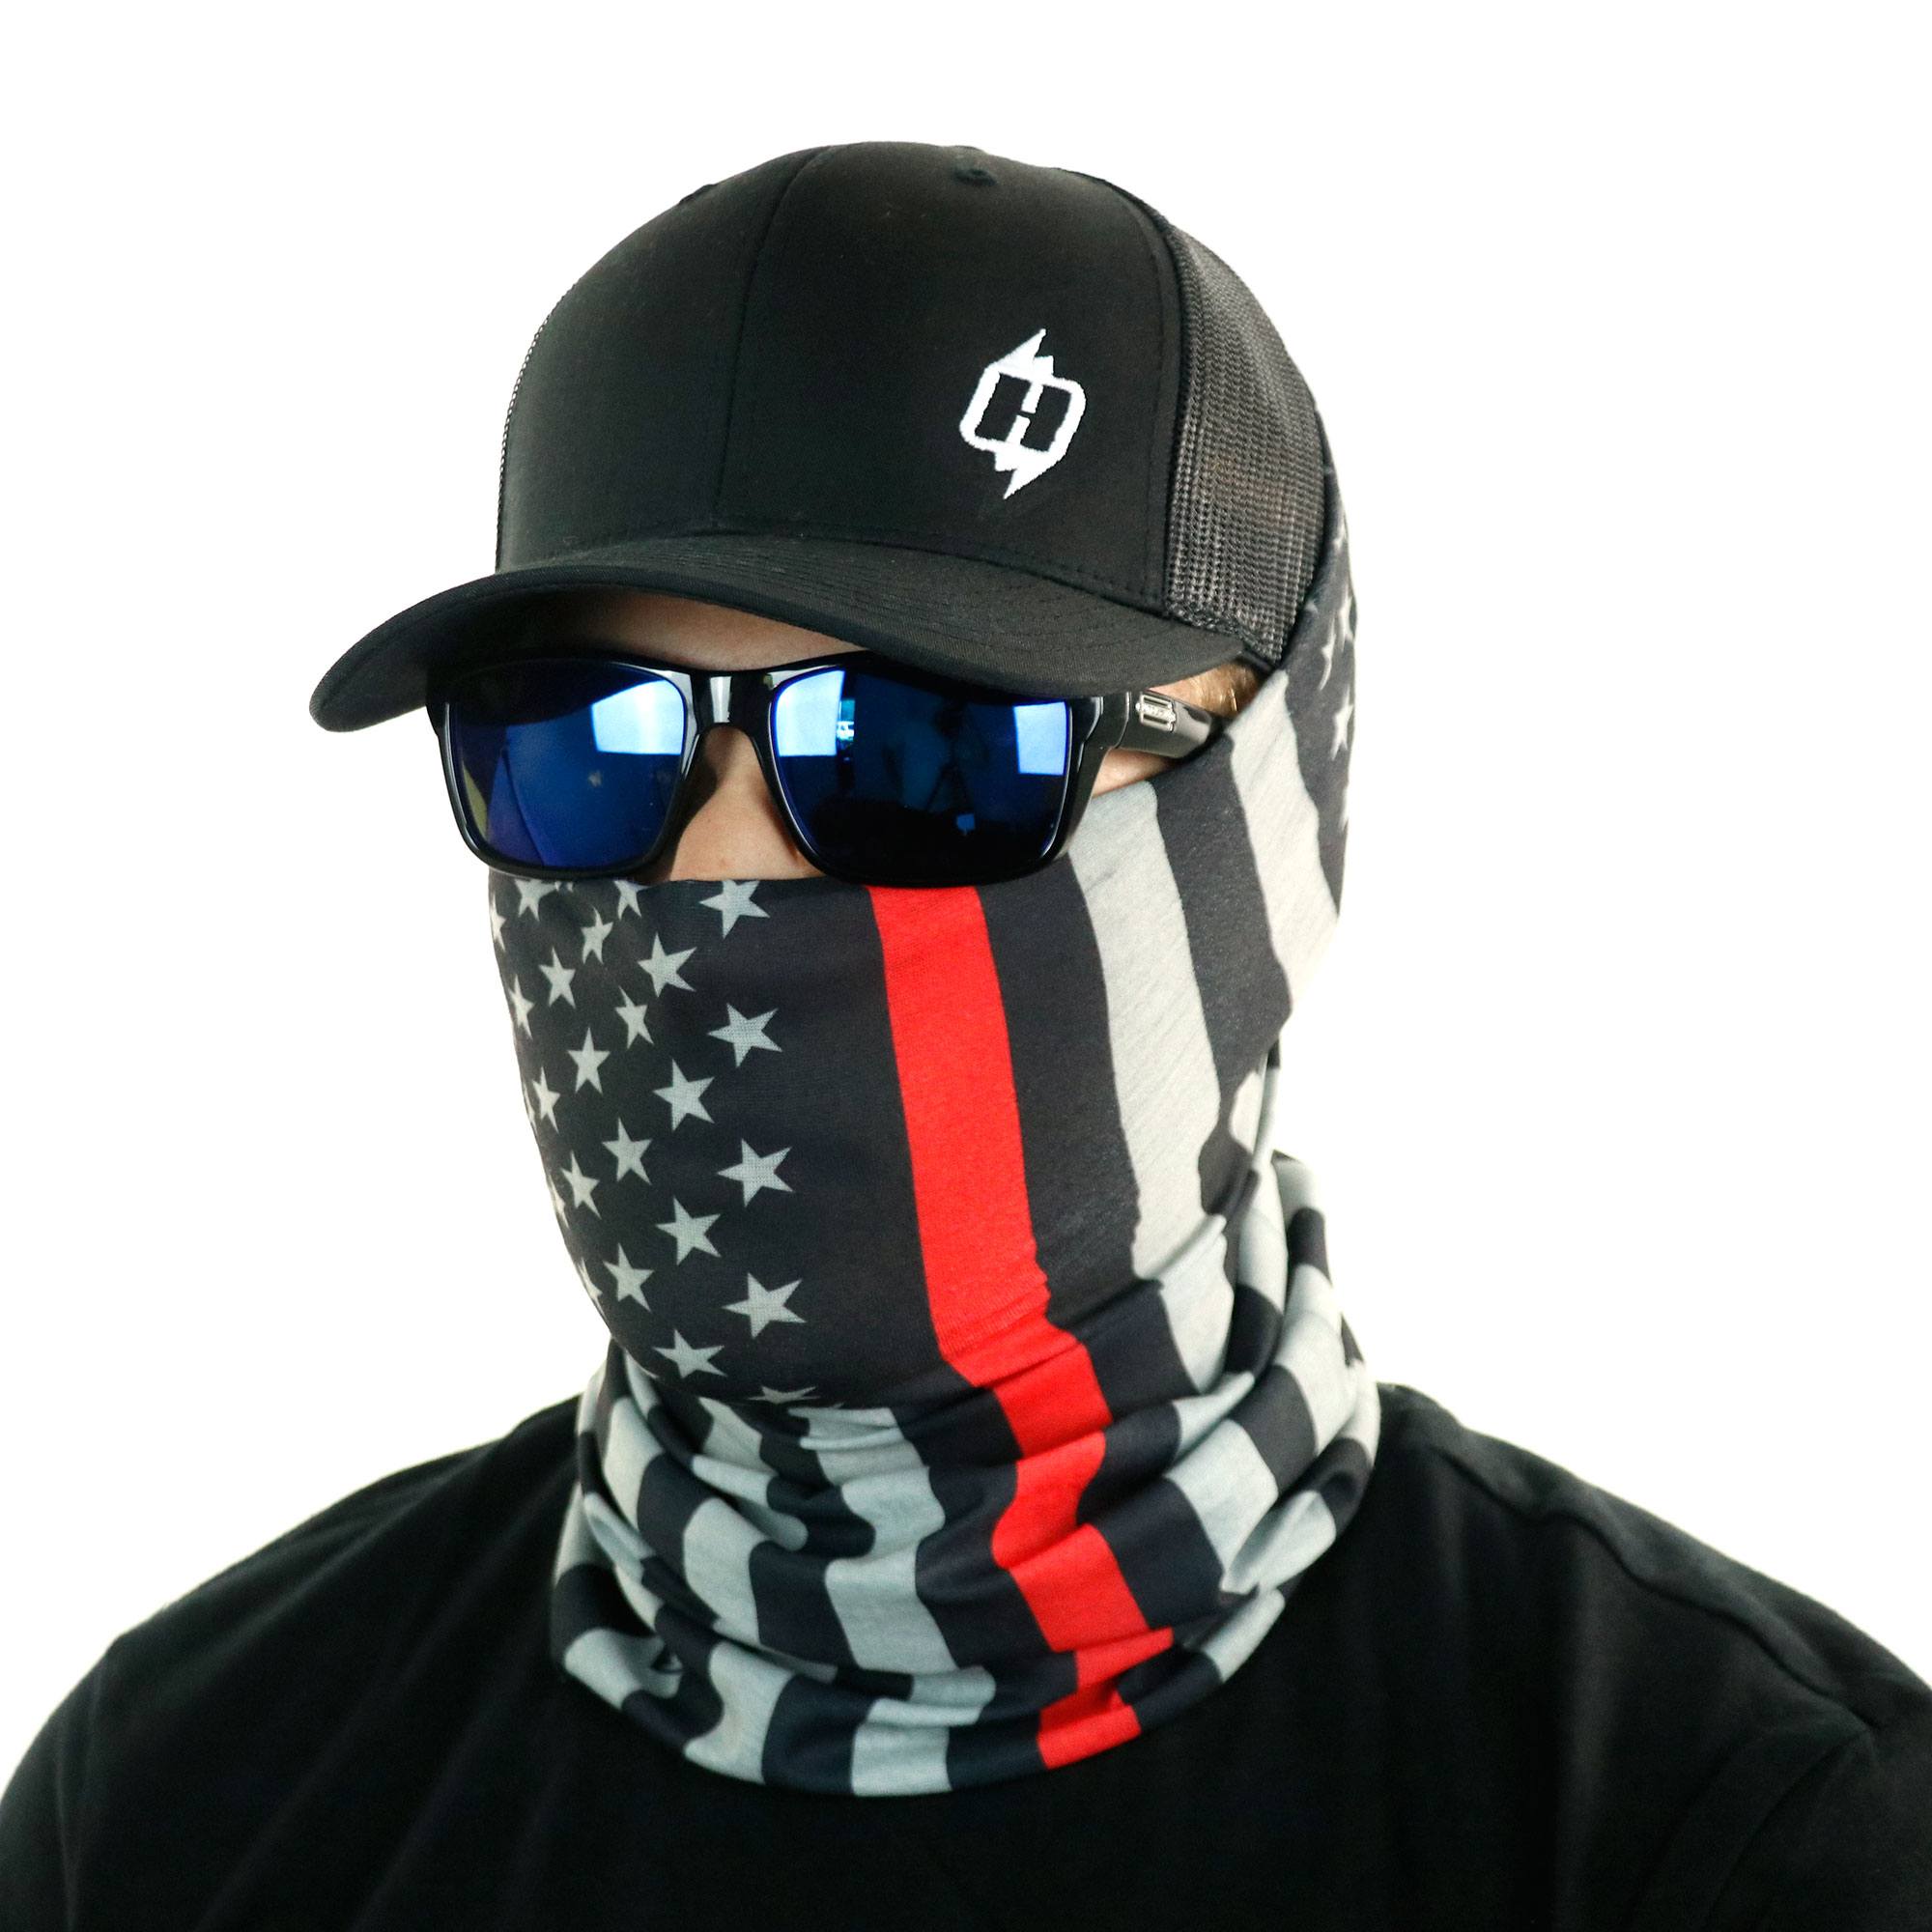 No One Fights Alone Heroes Flag Balaclava Ski Mask Windproof Face Mask Face Neck 